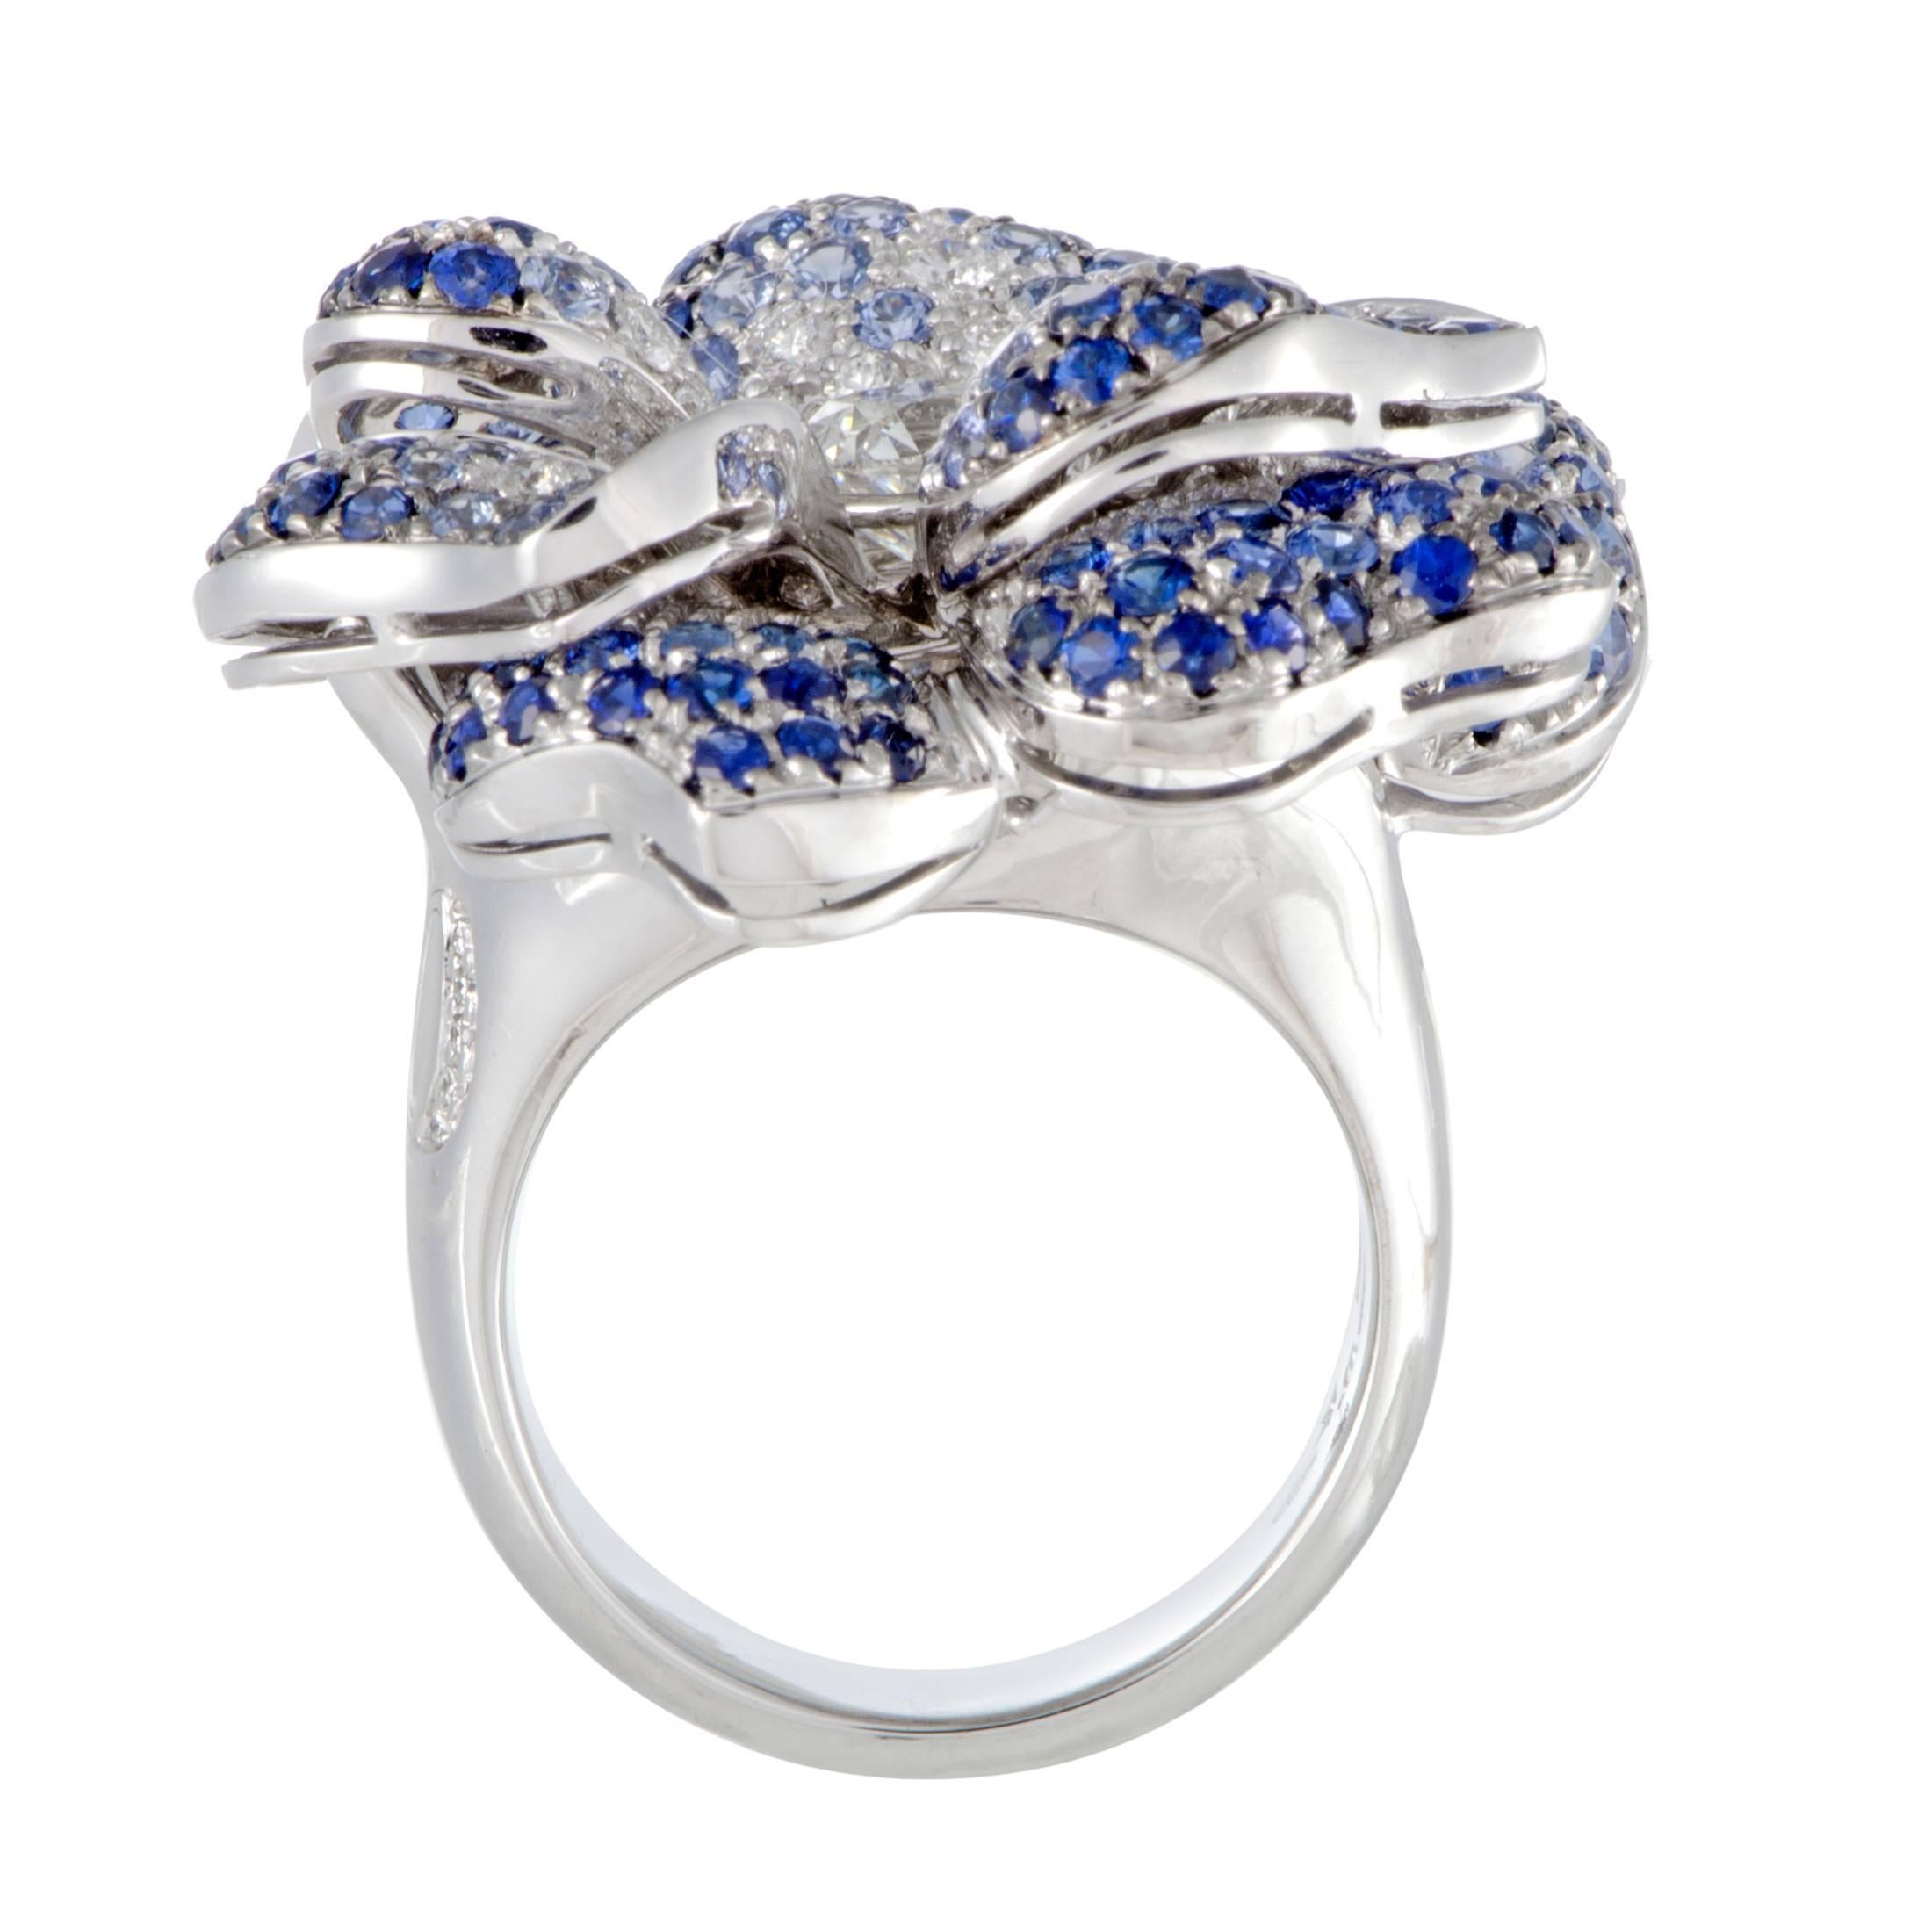 An embodiment of unrestrained splendor and luxurious elegance, this spectacular ring offers an exceptionally eye-catching, extravagant appearance. Designed by Leo Pizzo, the ring is made of 18K white gold and paved with 3.25 carats of sapphires and